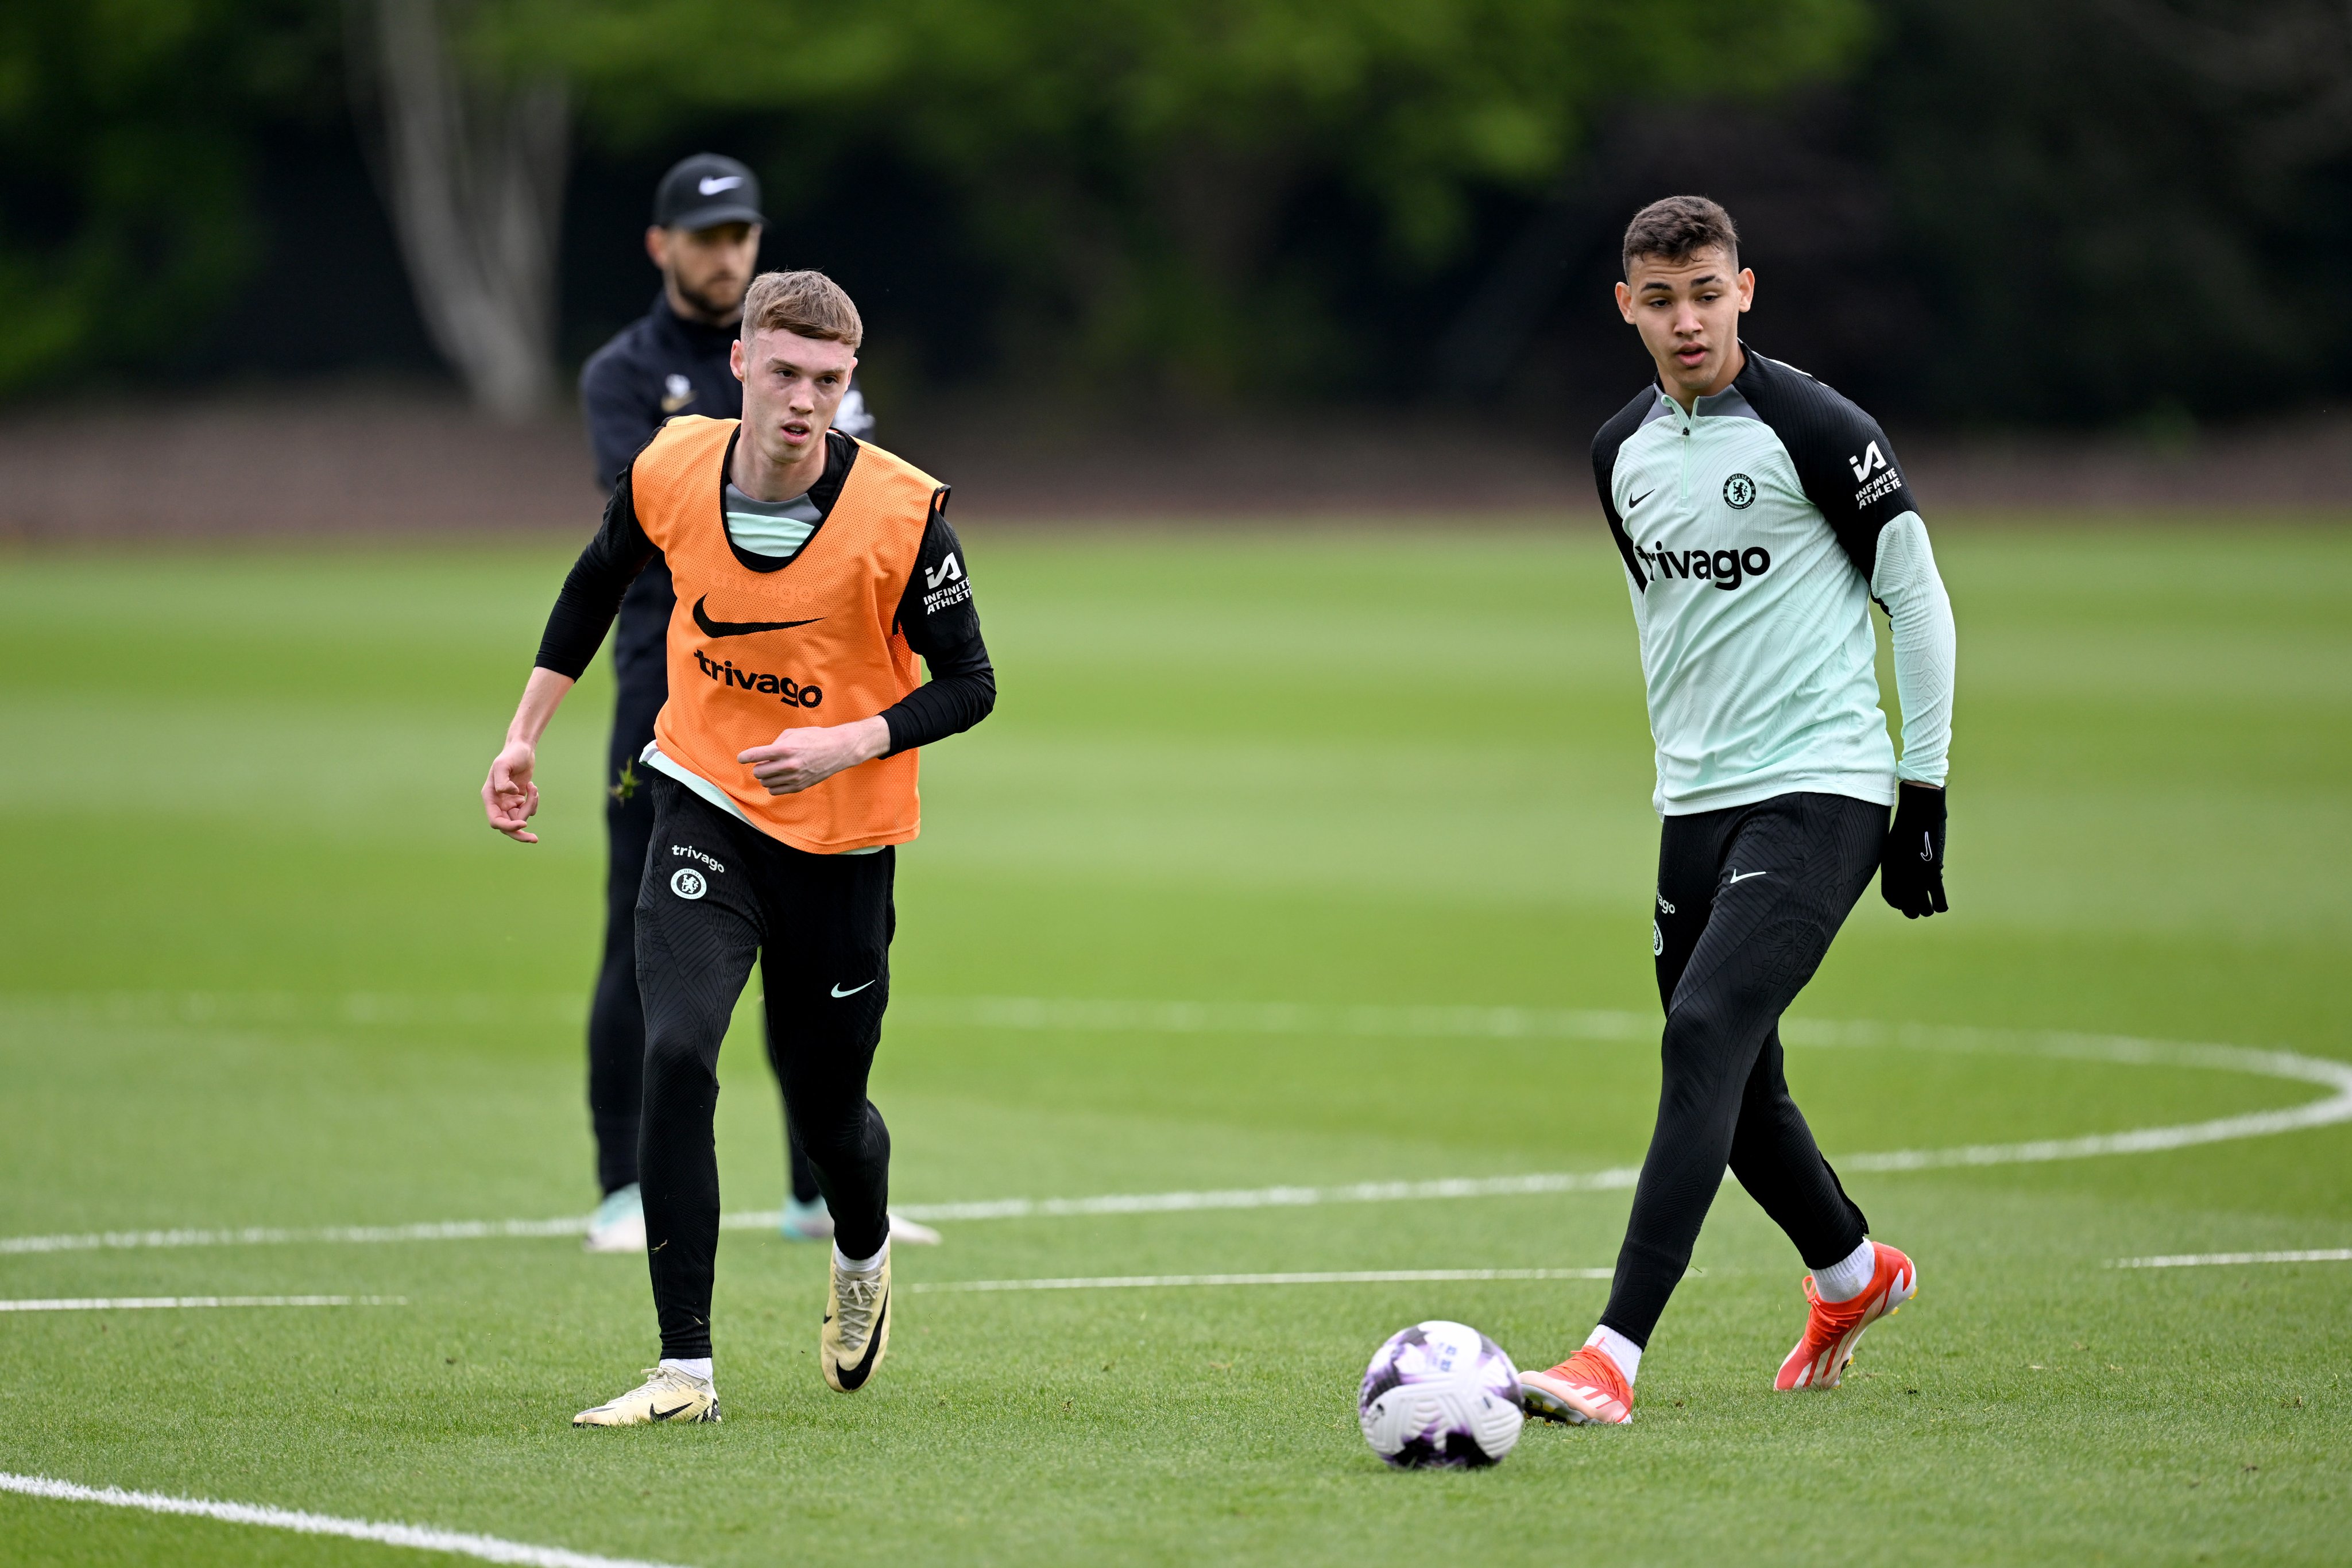 Chelsea handed huge boost as Cole Palmer returns to training ahead of Aston Villa game